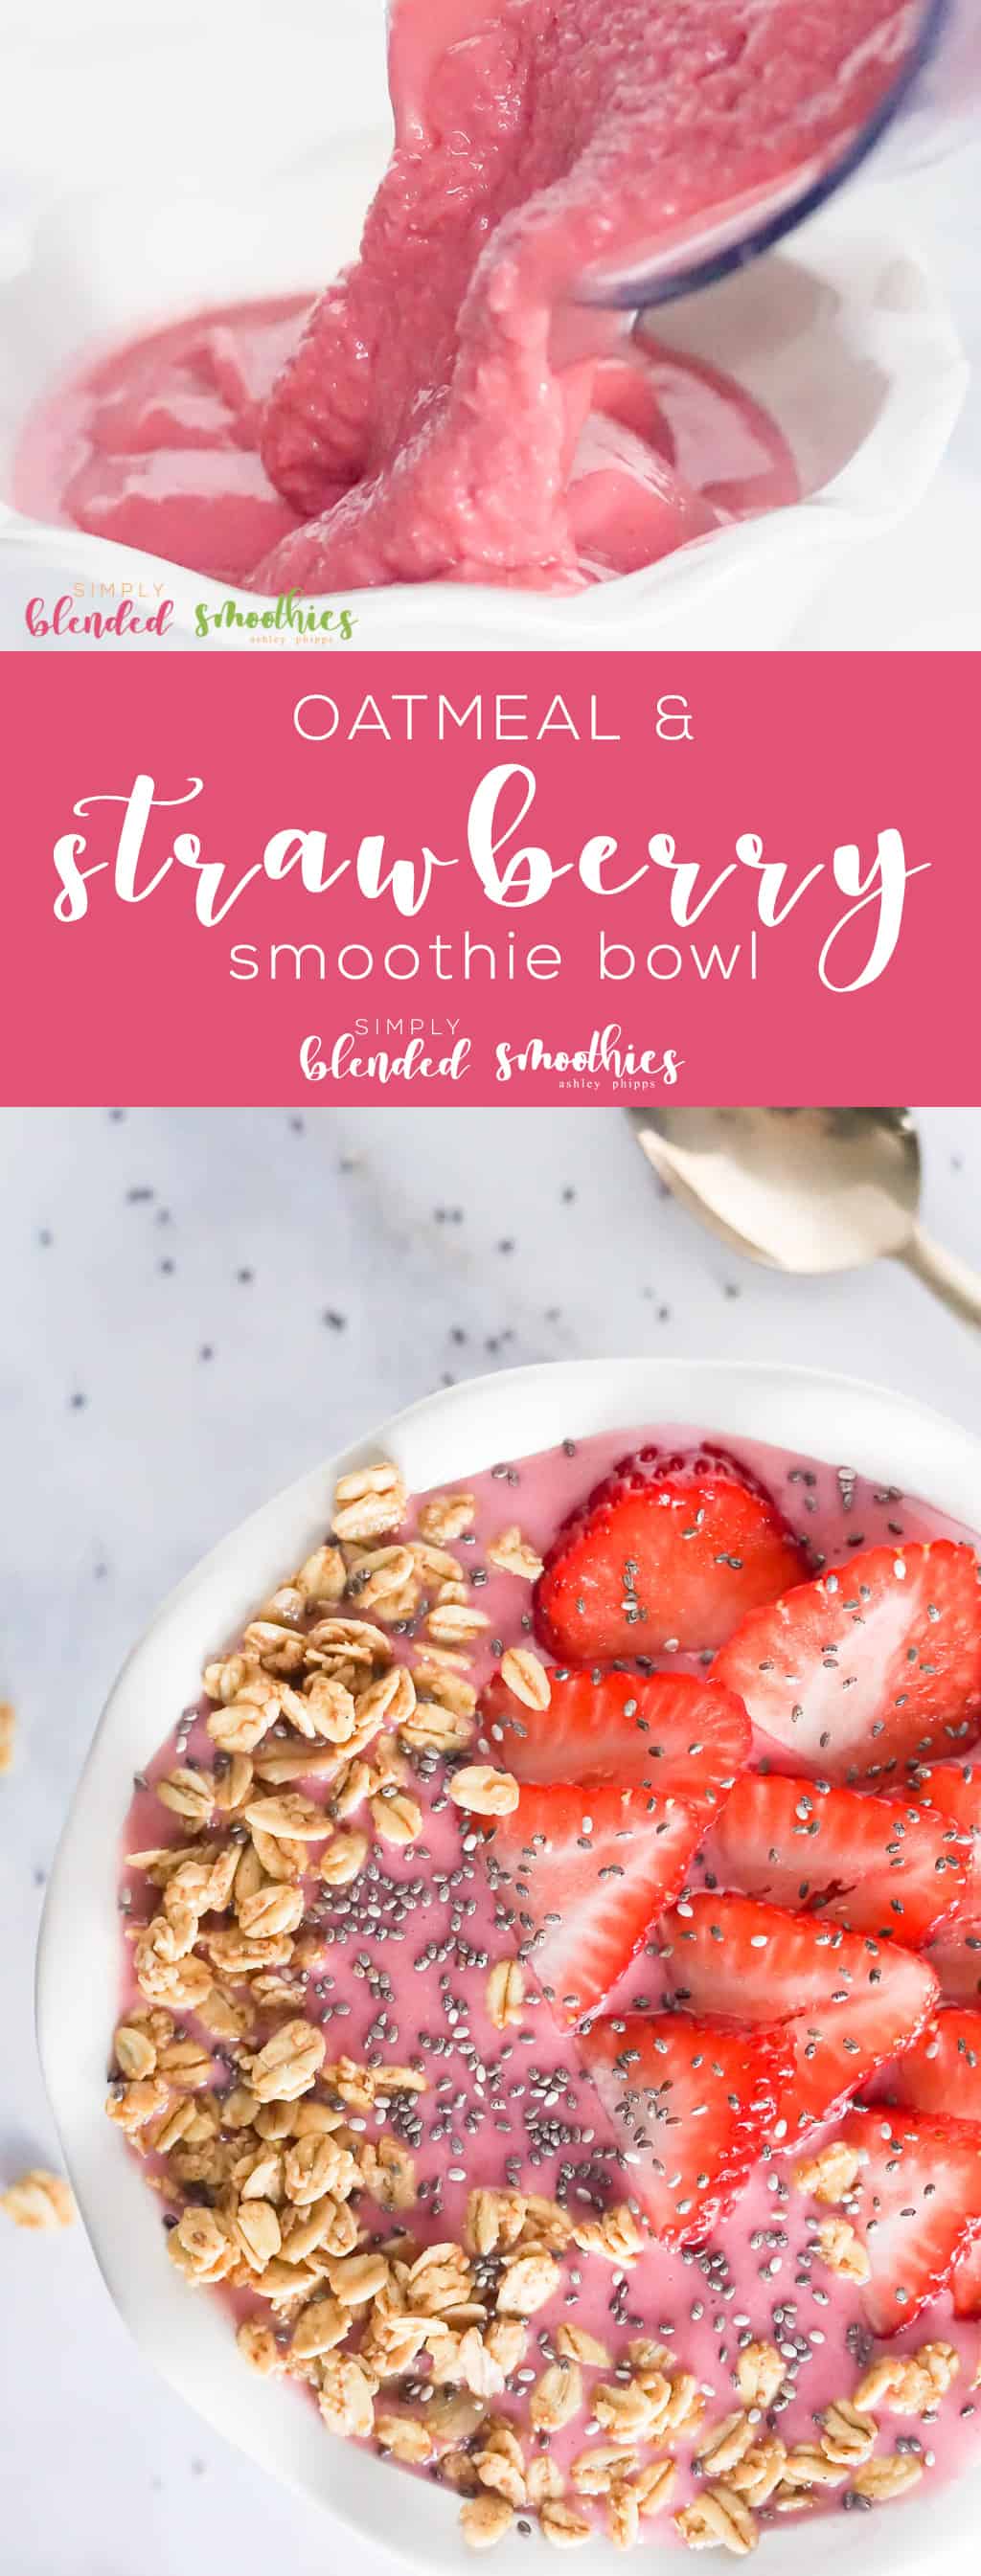 Oatmeal And Strawberry Smoothie Bowl - A Delicious Smoothie Bowl Recipe